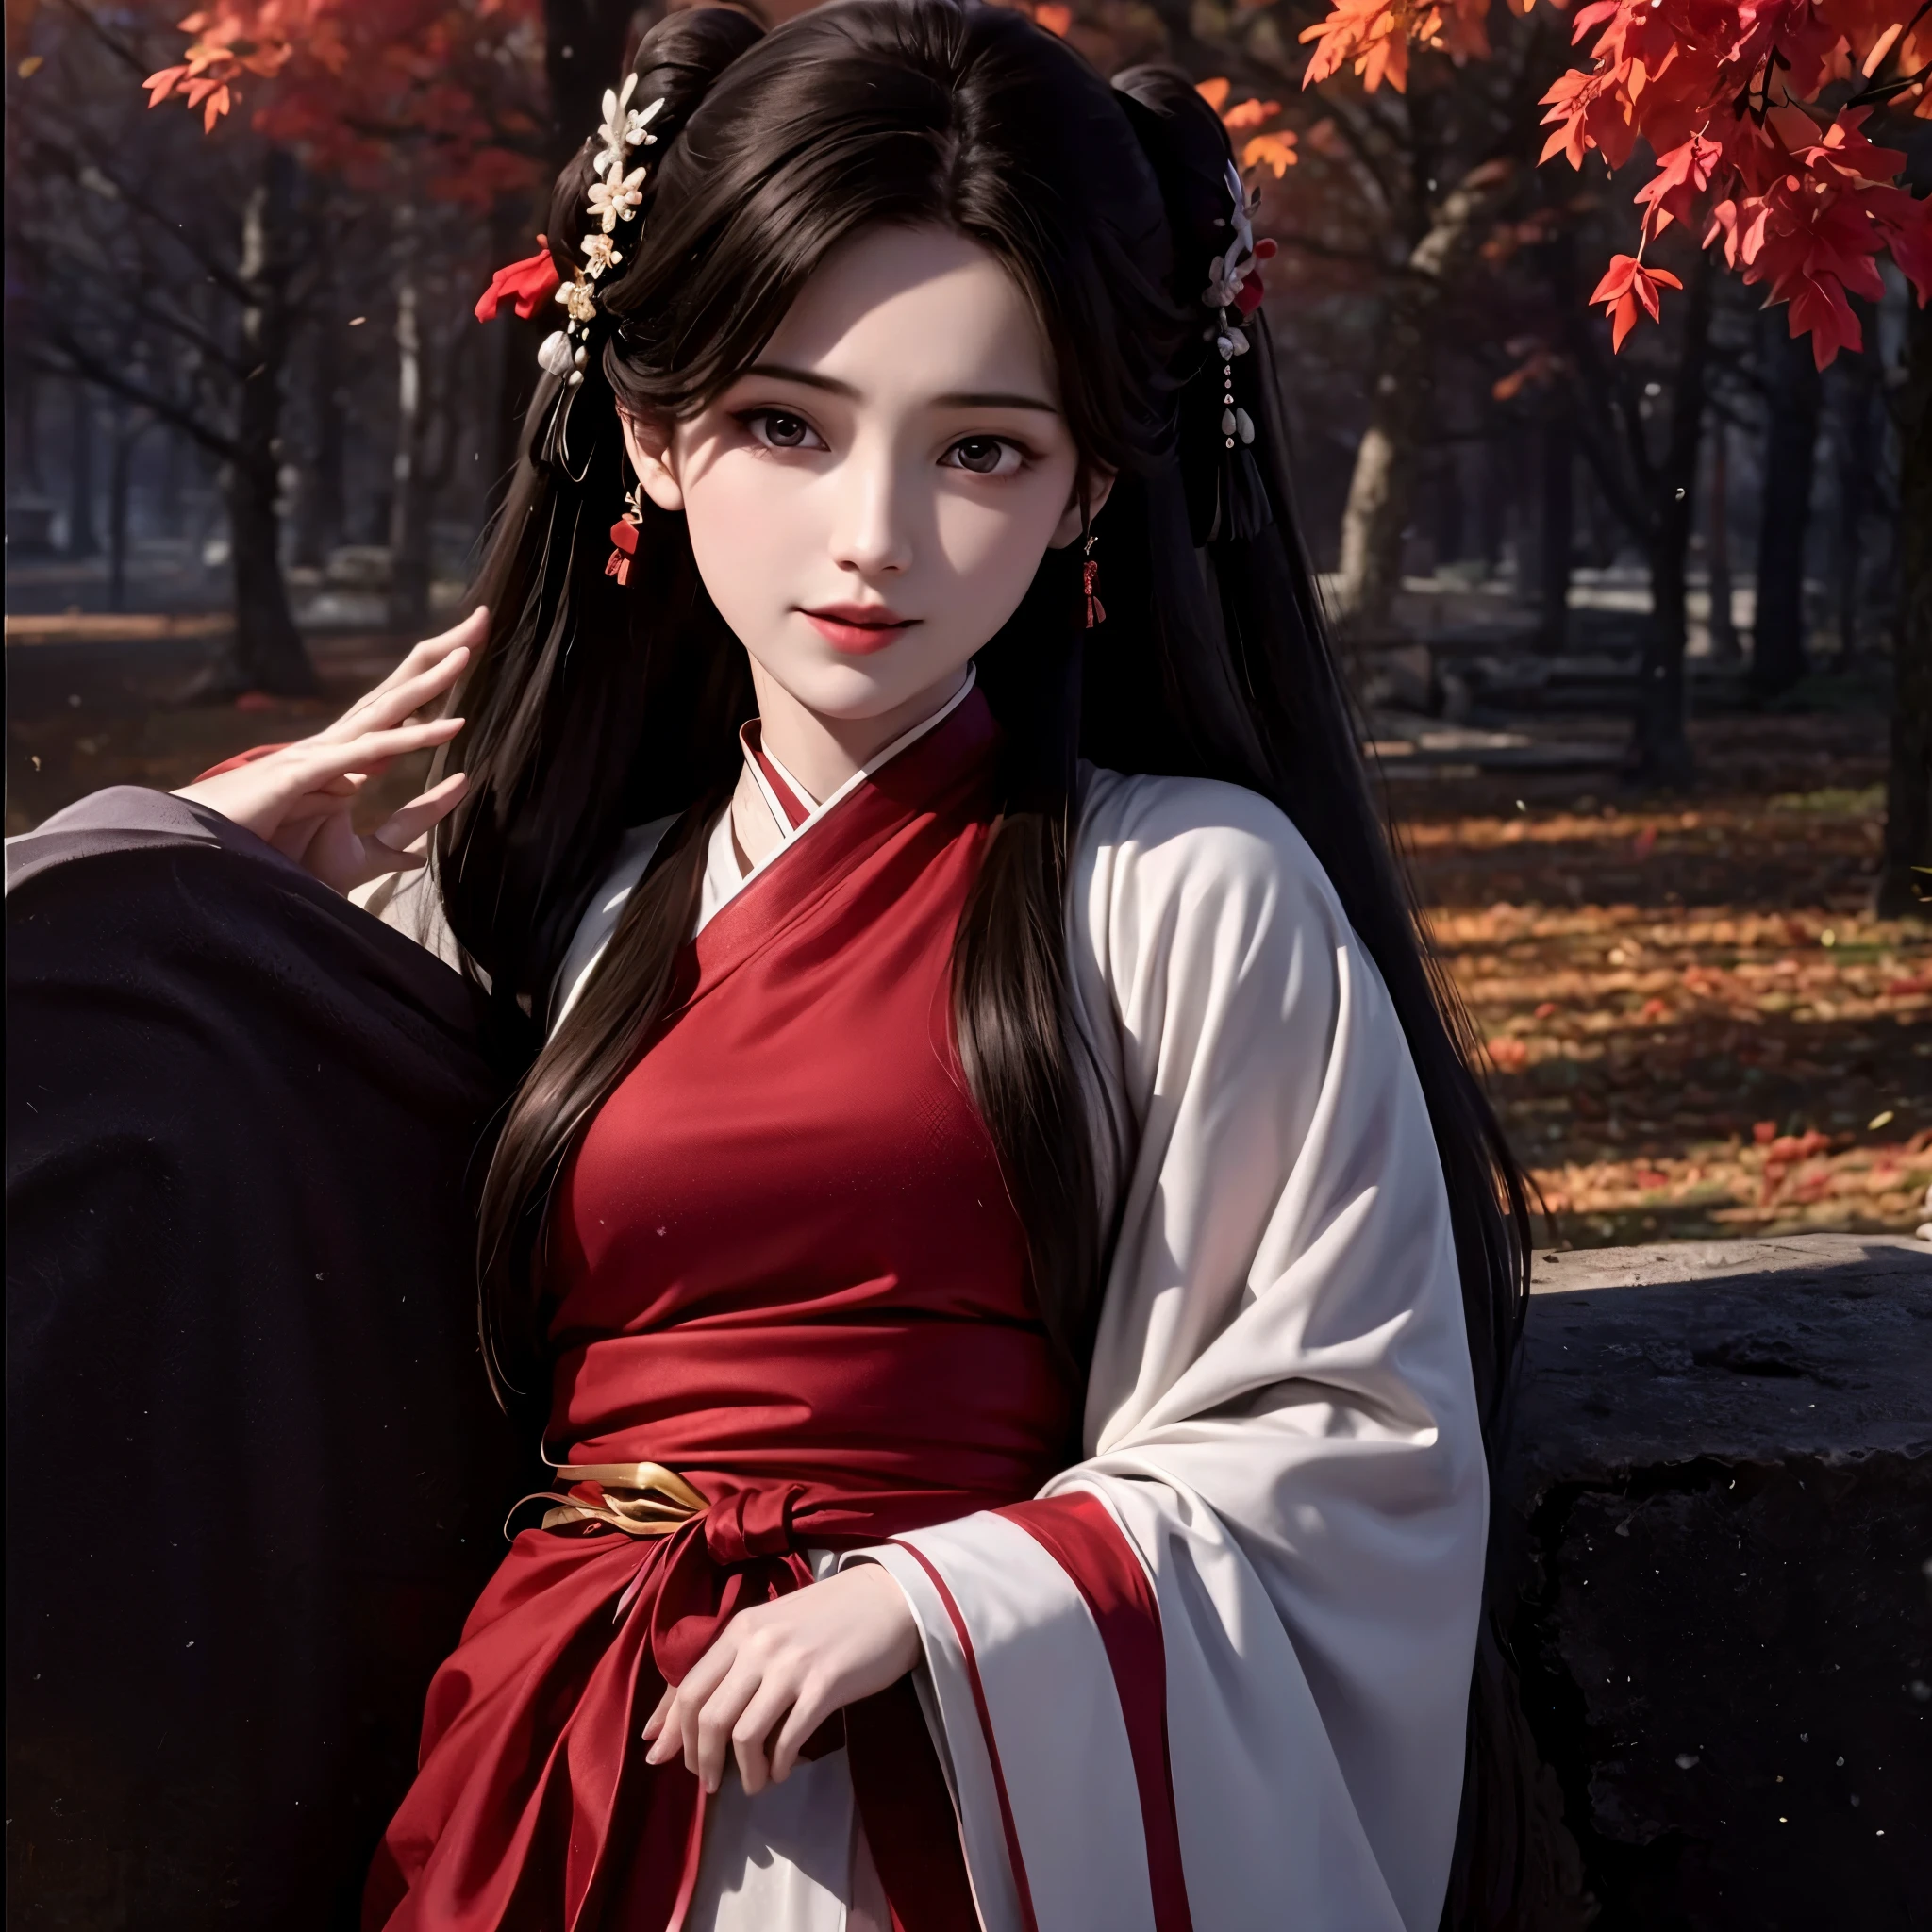 1 solo , Beautiful girl with long brown hair, bright brown eyes, sweet smile, snow white skin,Her long hair is decorated with red mulberry flowers 🏵️,The girl wore a simple white hanfu with a red cloth tied around her waist, Forest setting filled with mulberry tree  ,central focusing on girl in graphics, realistic graphics, 8k, wearing white hanfu and red skirt hanfu